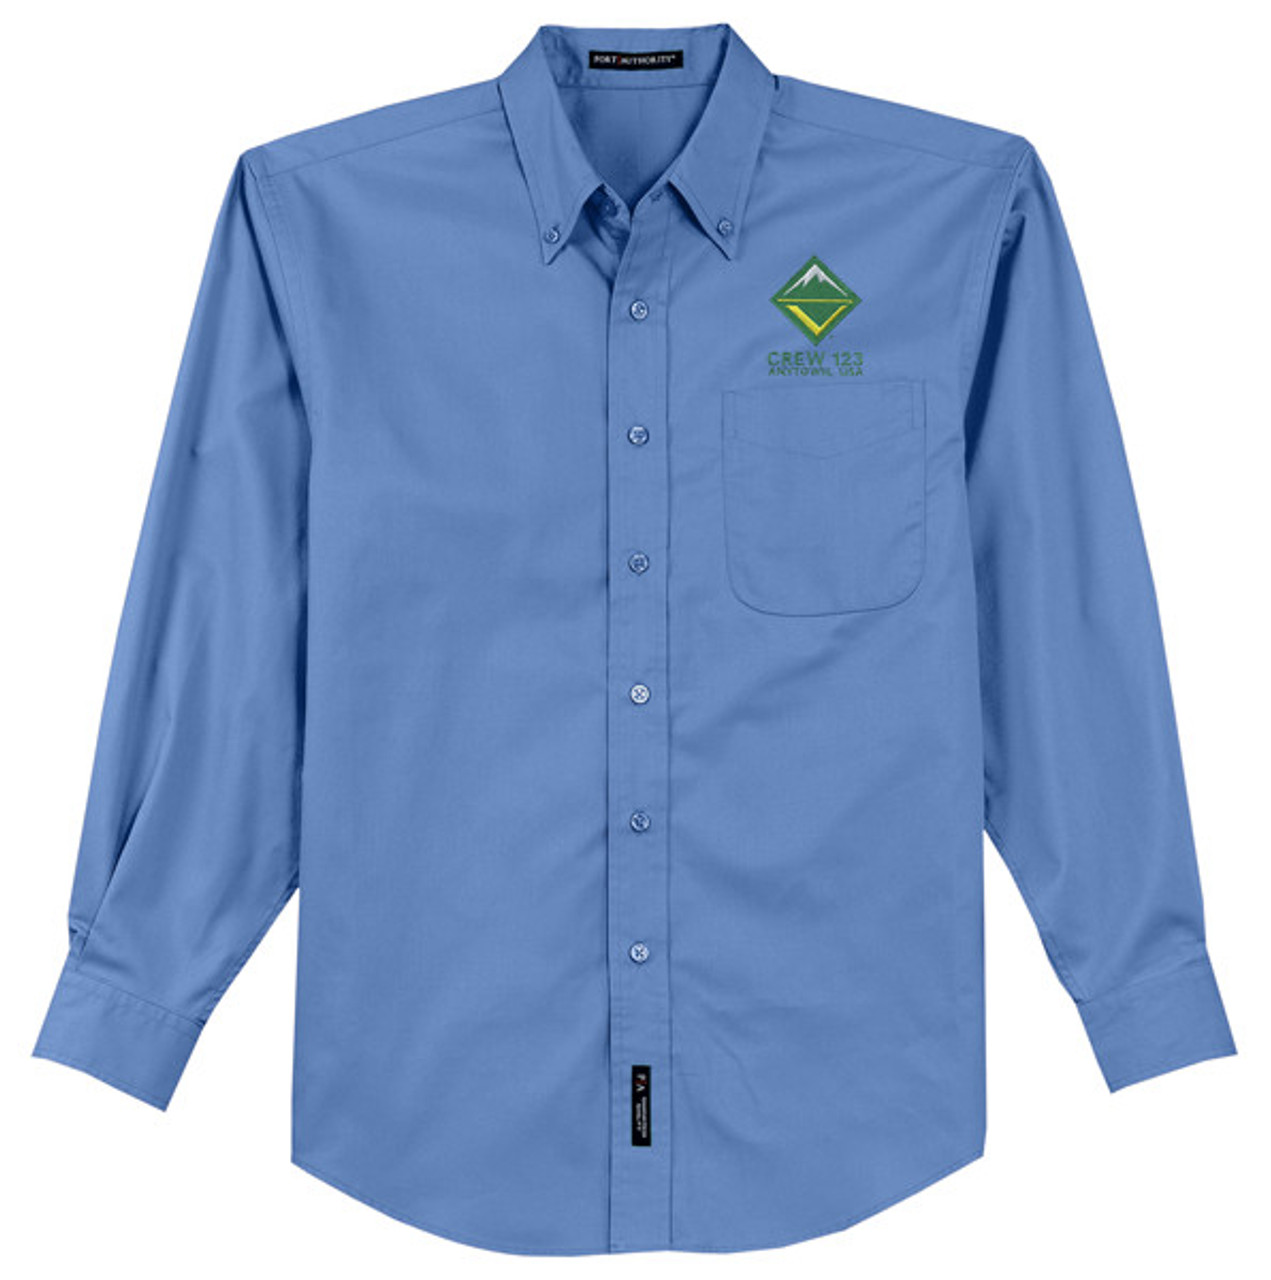 Long Sleeve Easy Care Shirt Men's with Embroidered Venturing Logo